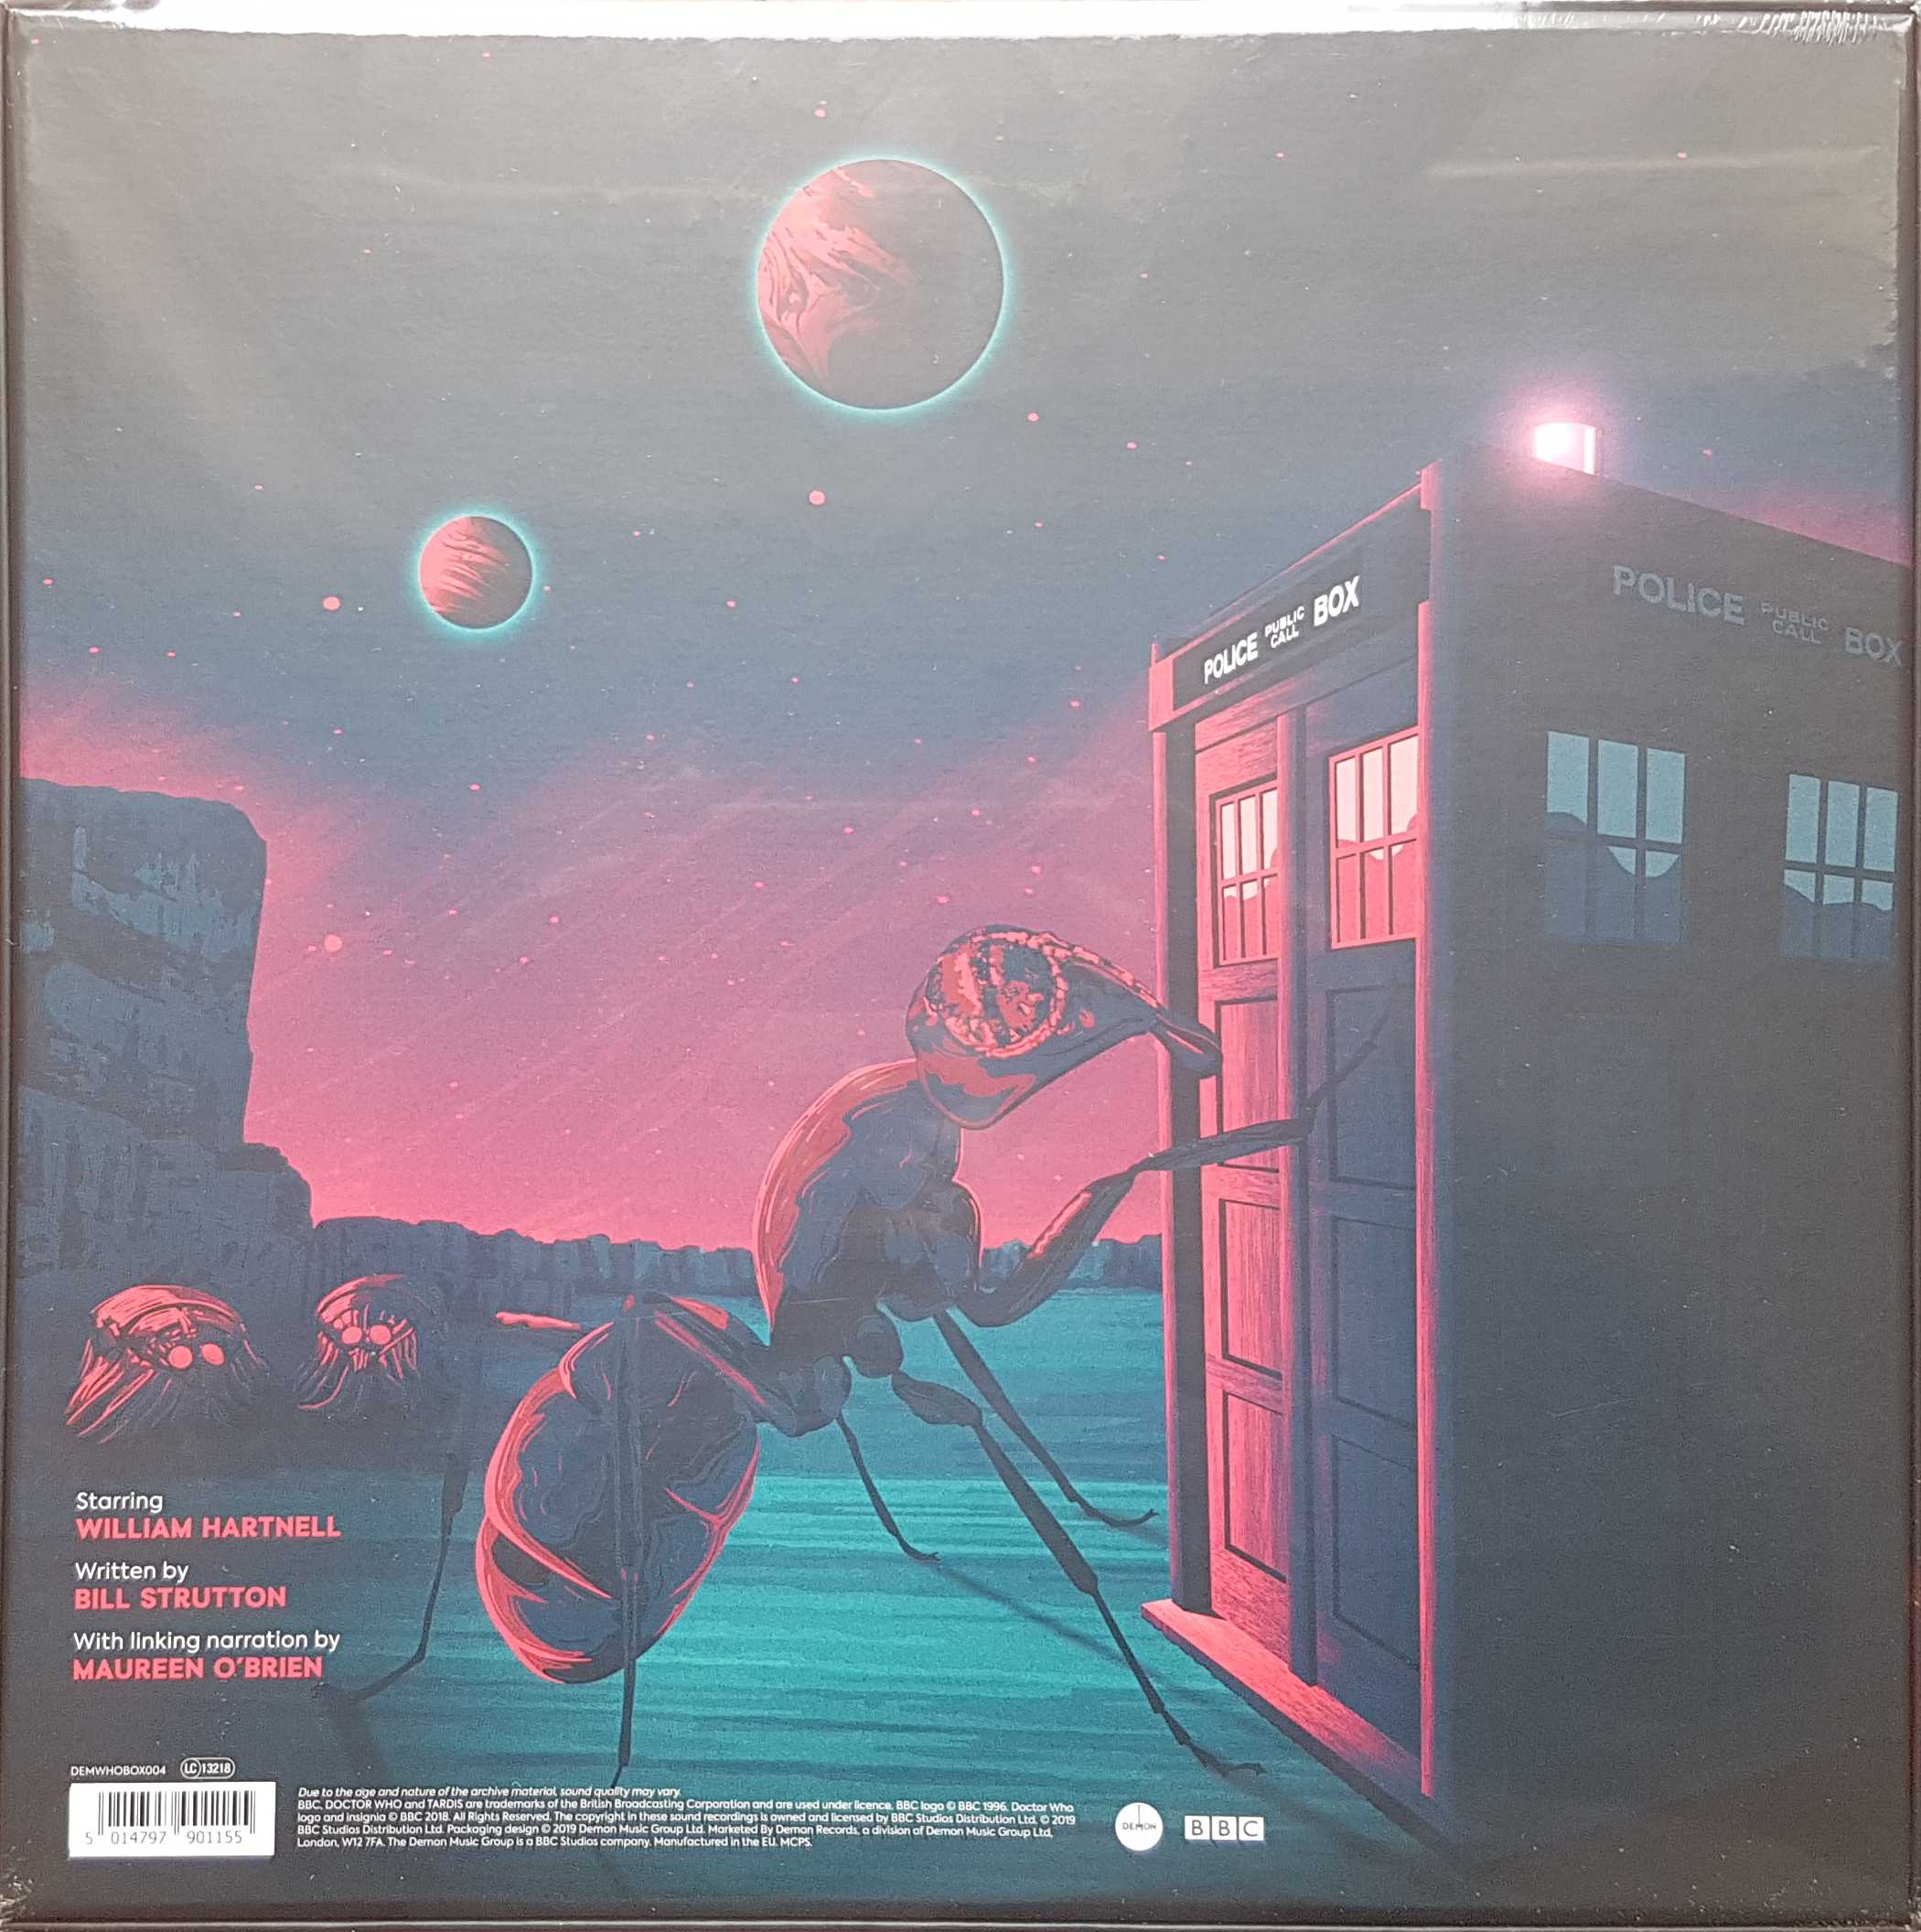 Picture of DEMWHOBOX004X Doctor Who - The web planet by artist Bill Strutton from the BBC records and Tapes library